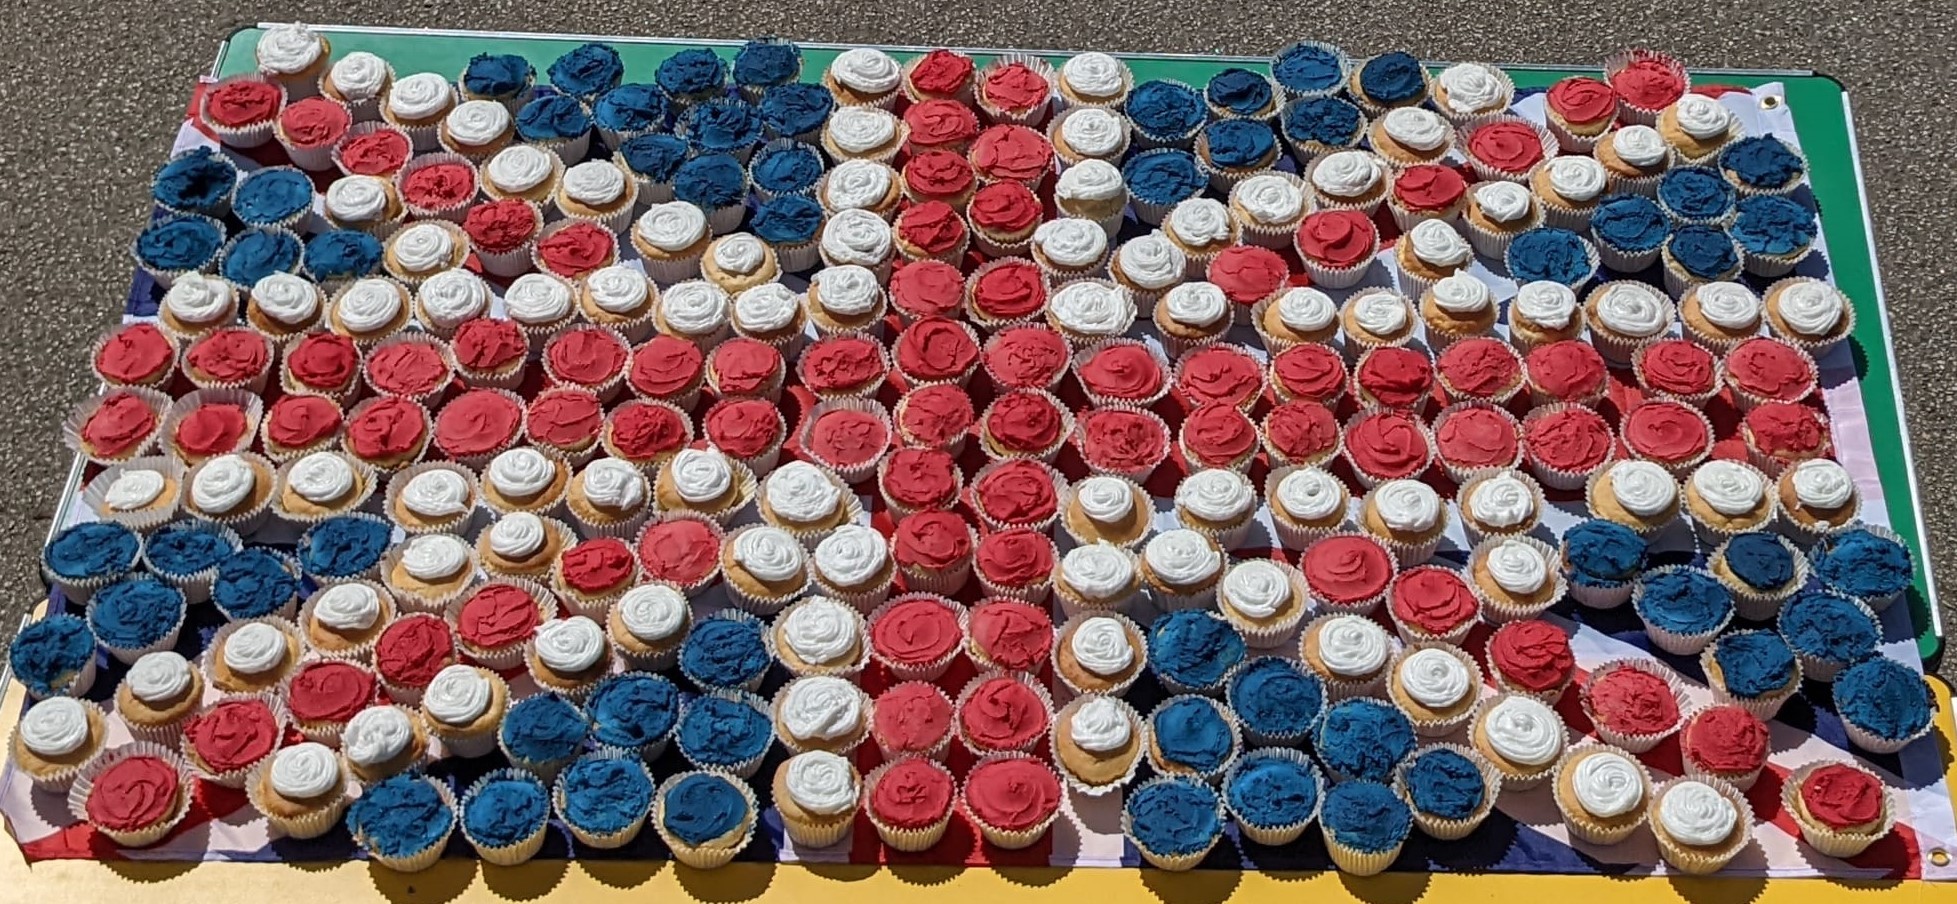 500 red, white and blue cupcakes were made by the kitchen staff. Photo: Kate Lockett